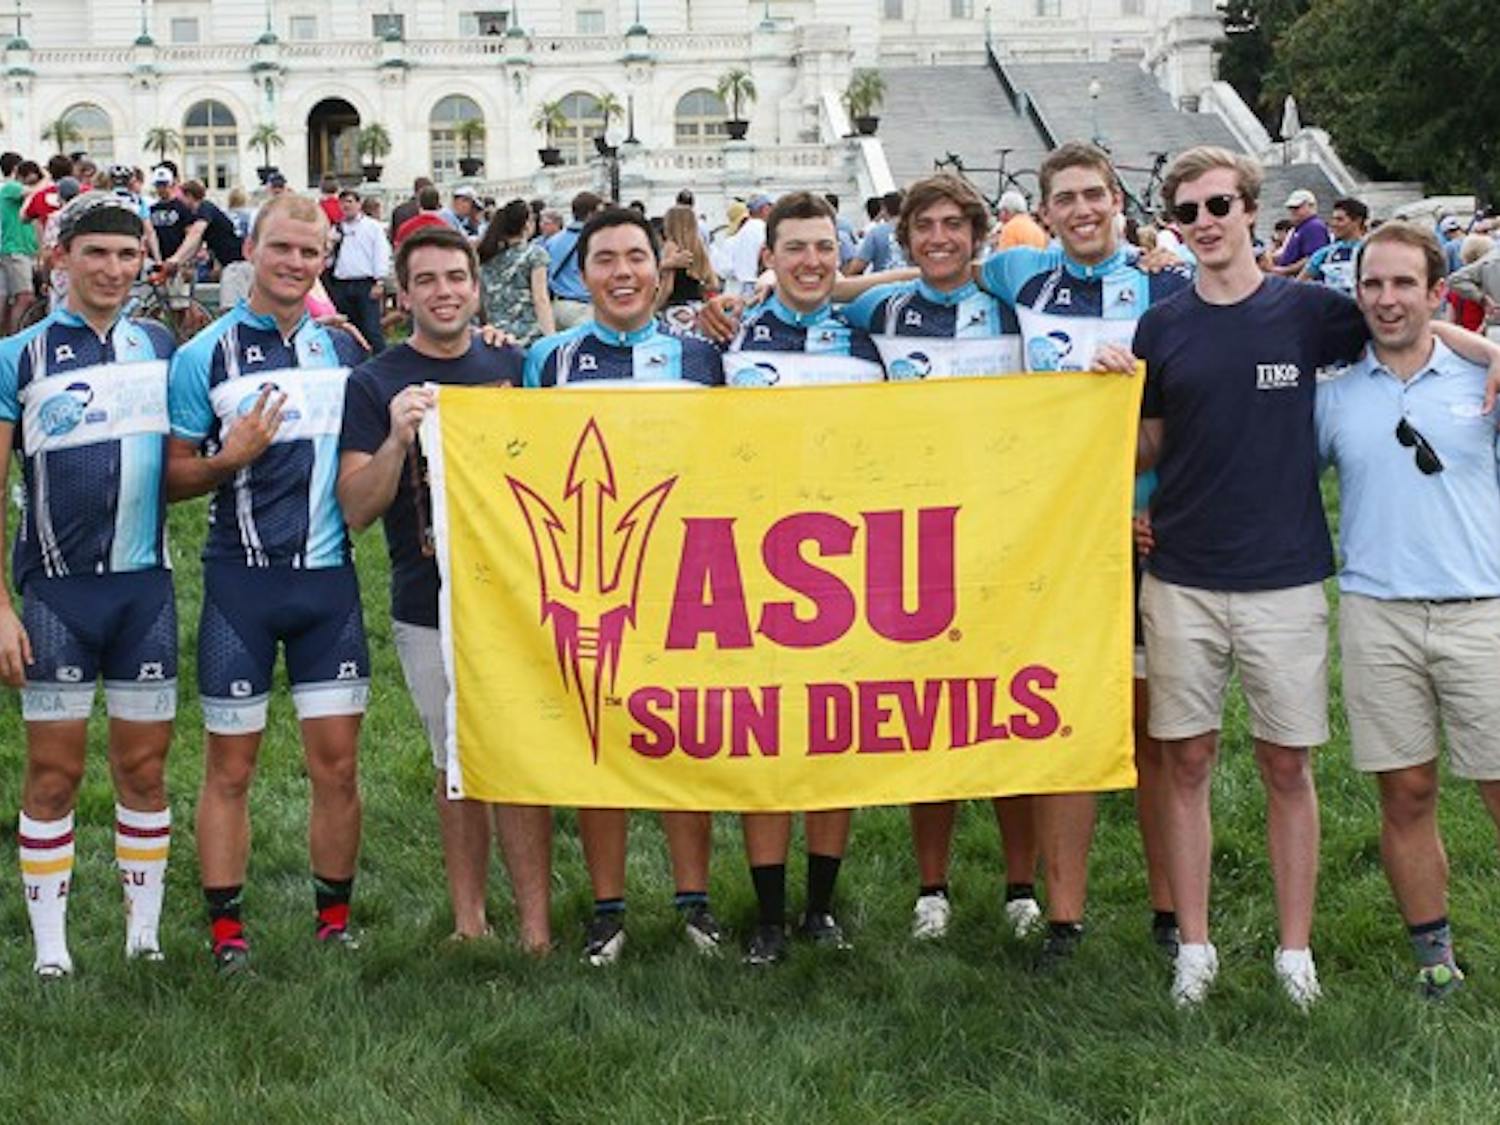 ASU's Pi Kappa Phi at the U.S. Capitol on August 2014 after six cyclists and one project manager cycled across the country for people with disabilities during an event known as the Journey of Hope. (Photo courtesy of Chris Dourov)